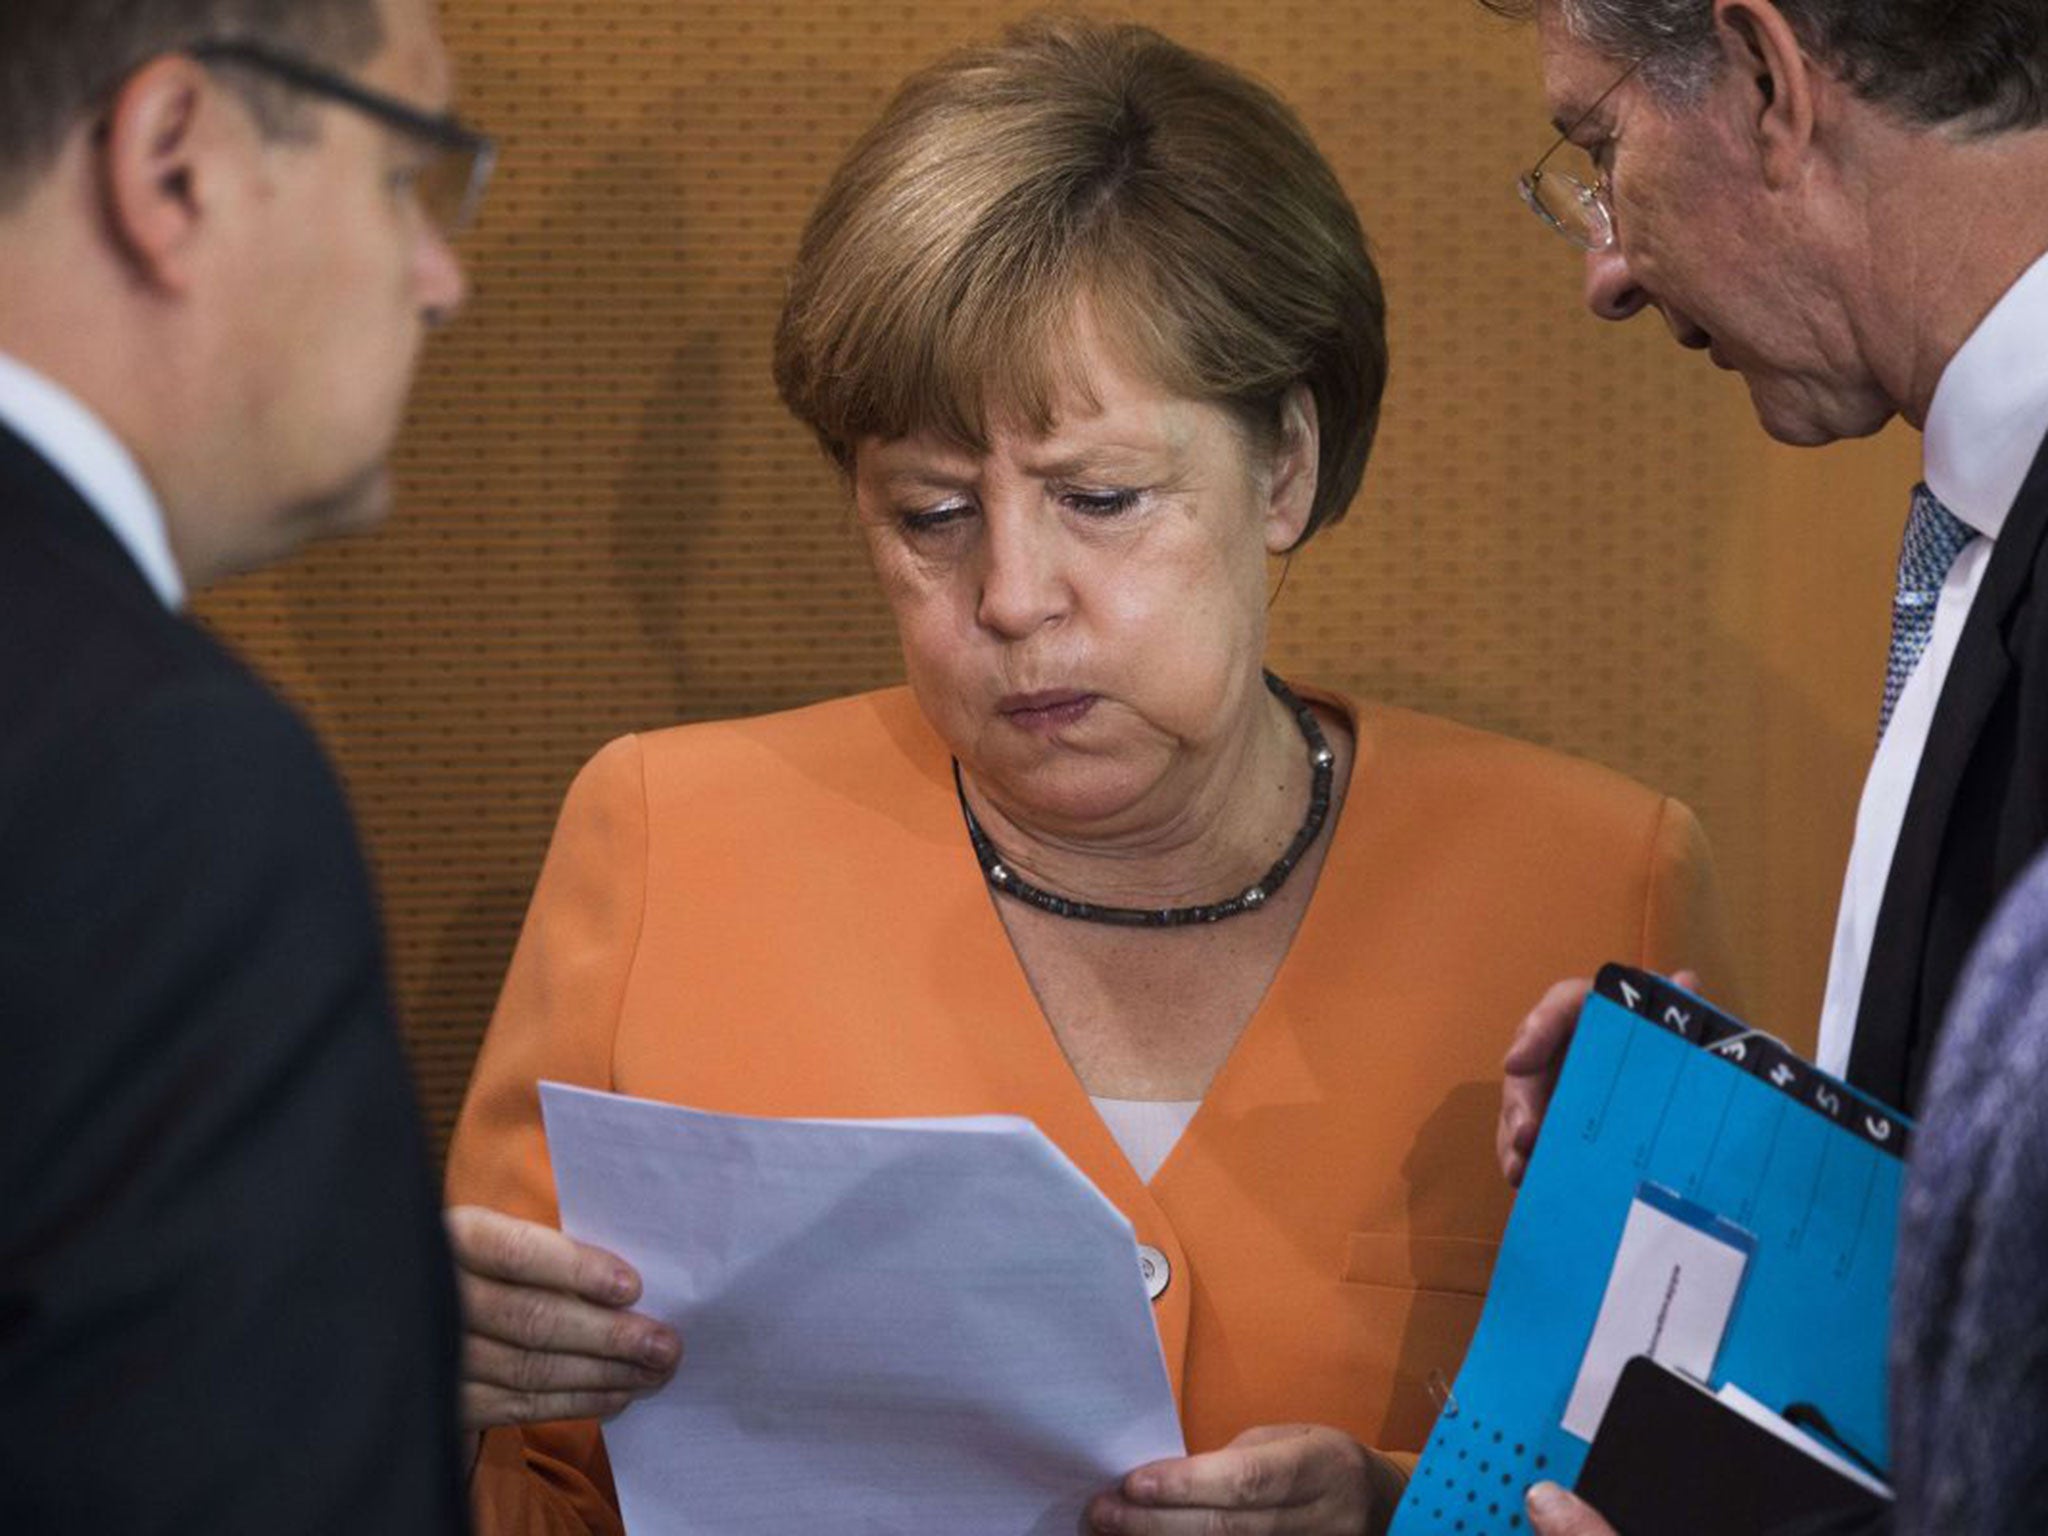 German Chancellor Angela Merkel (C) reacts as she is given a note as she arrives for the weekly cabinet meeting at the Chancellery in Berlin on July 1, 2015.